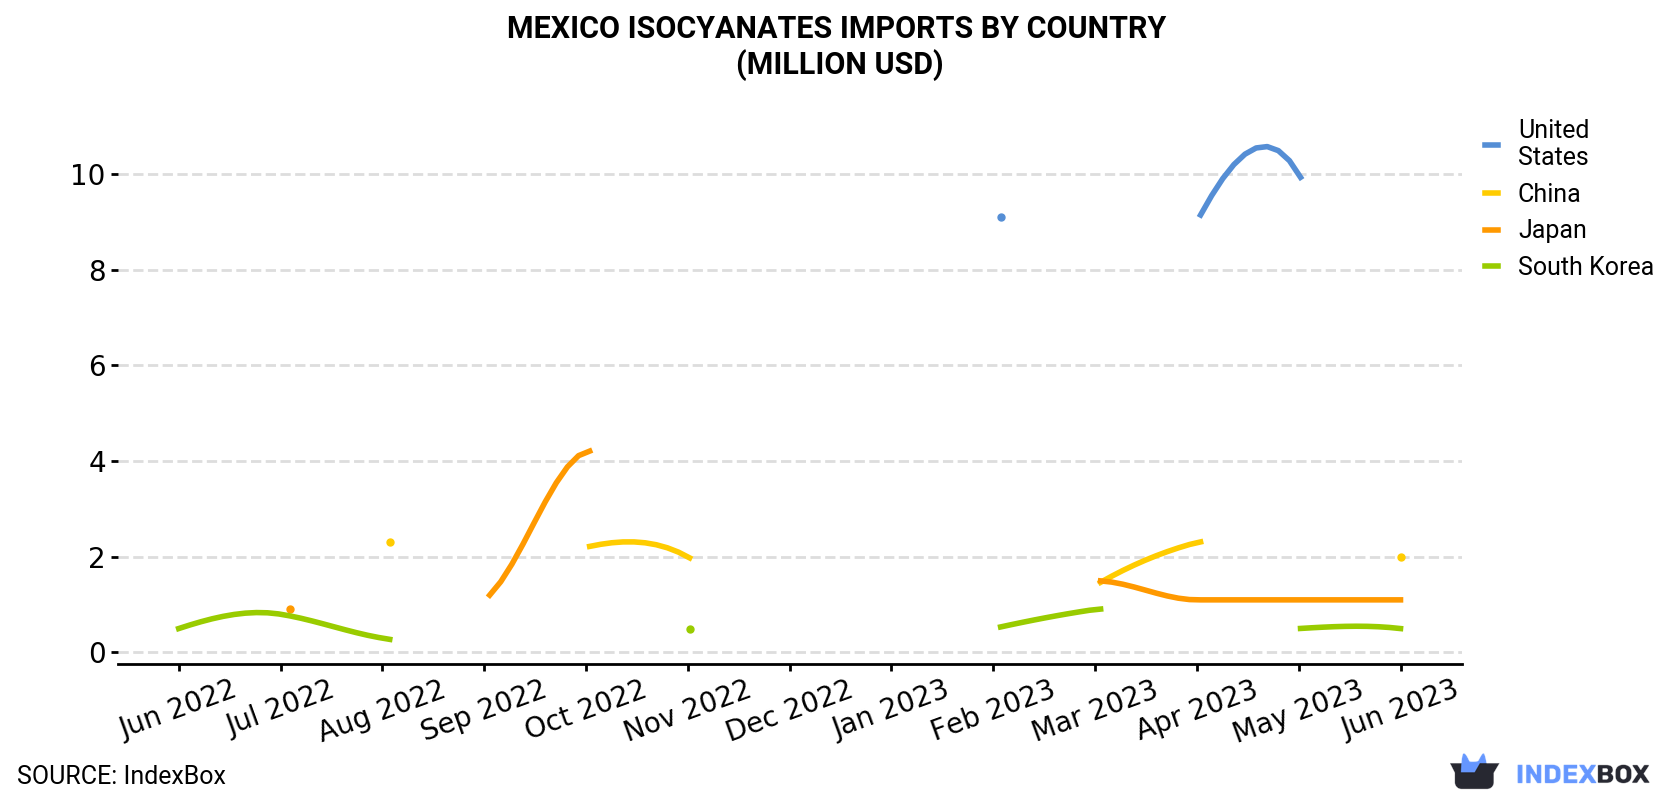 Mexico Isocyanates Imports By Country (Million USD)